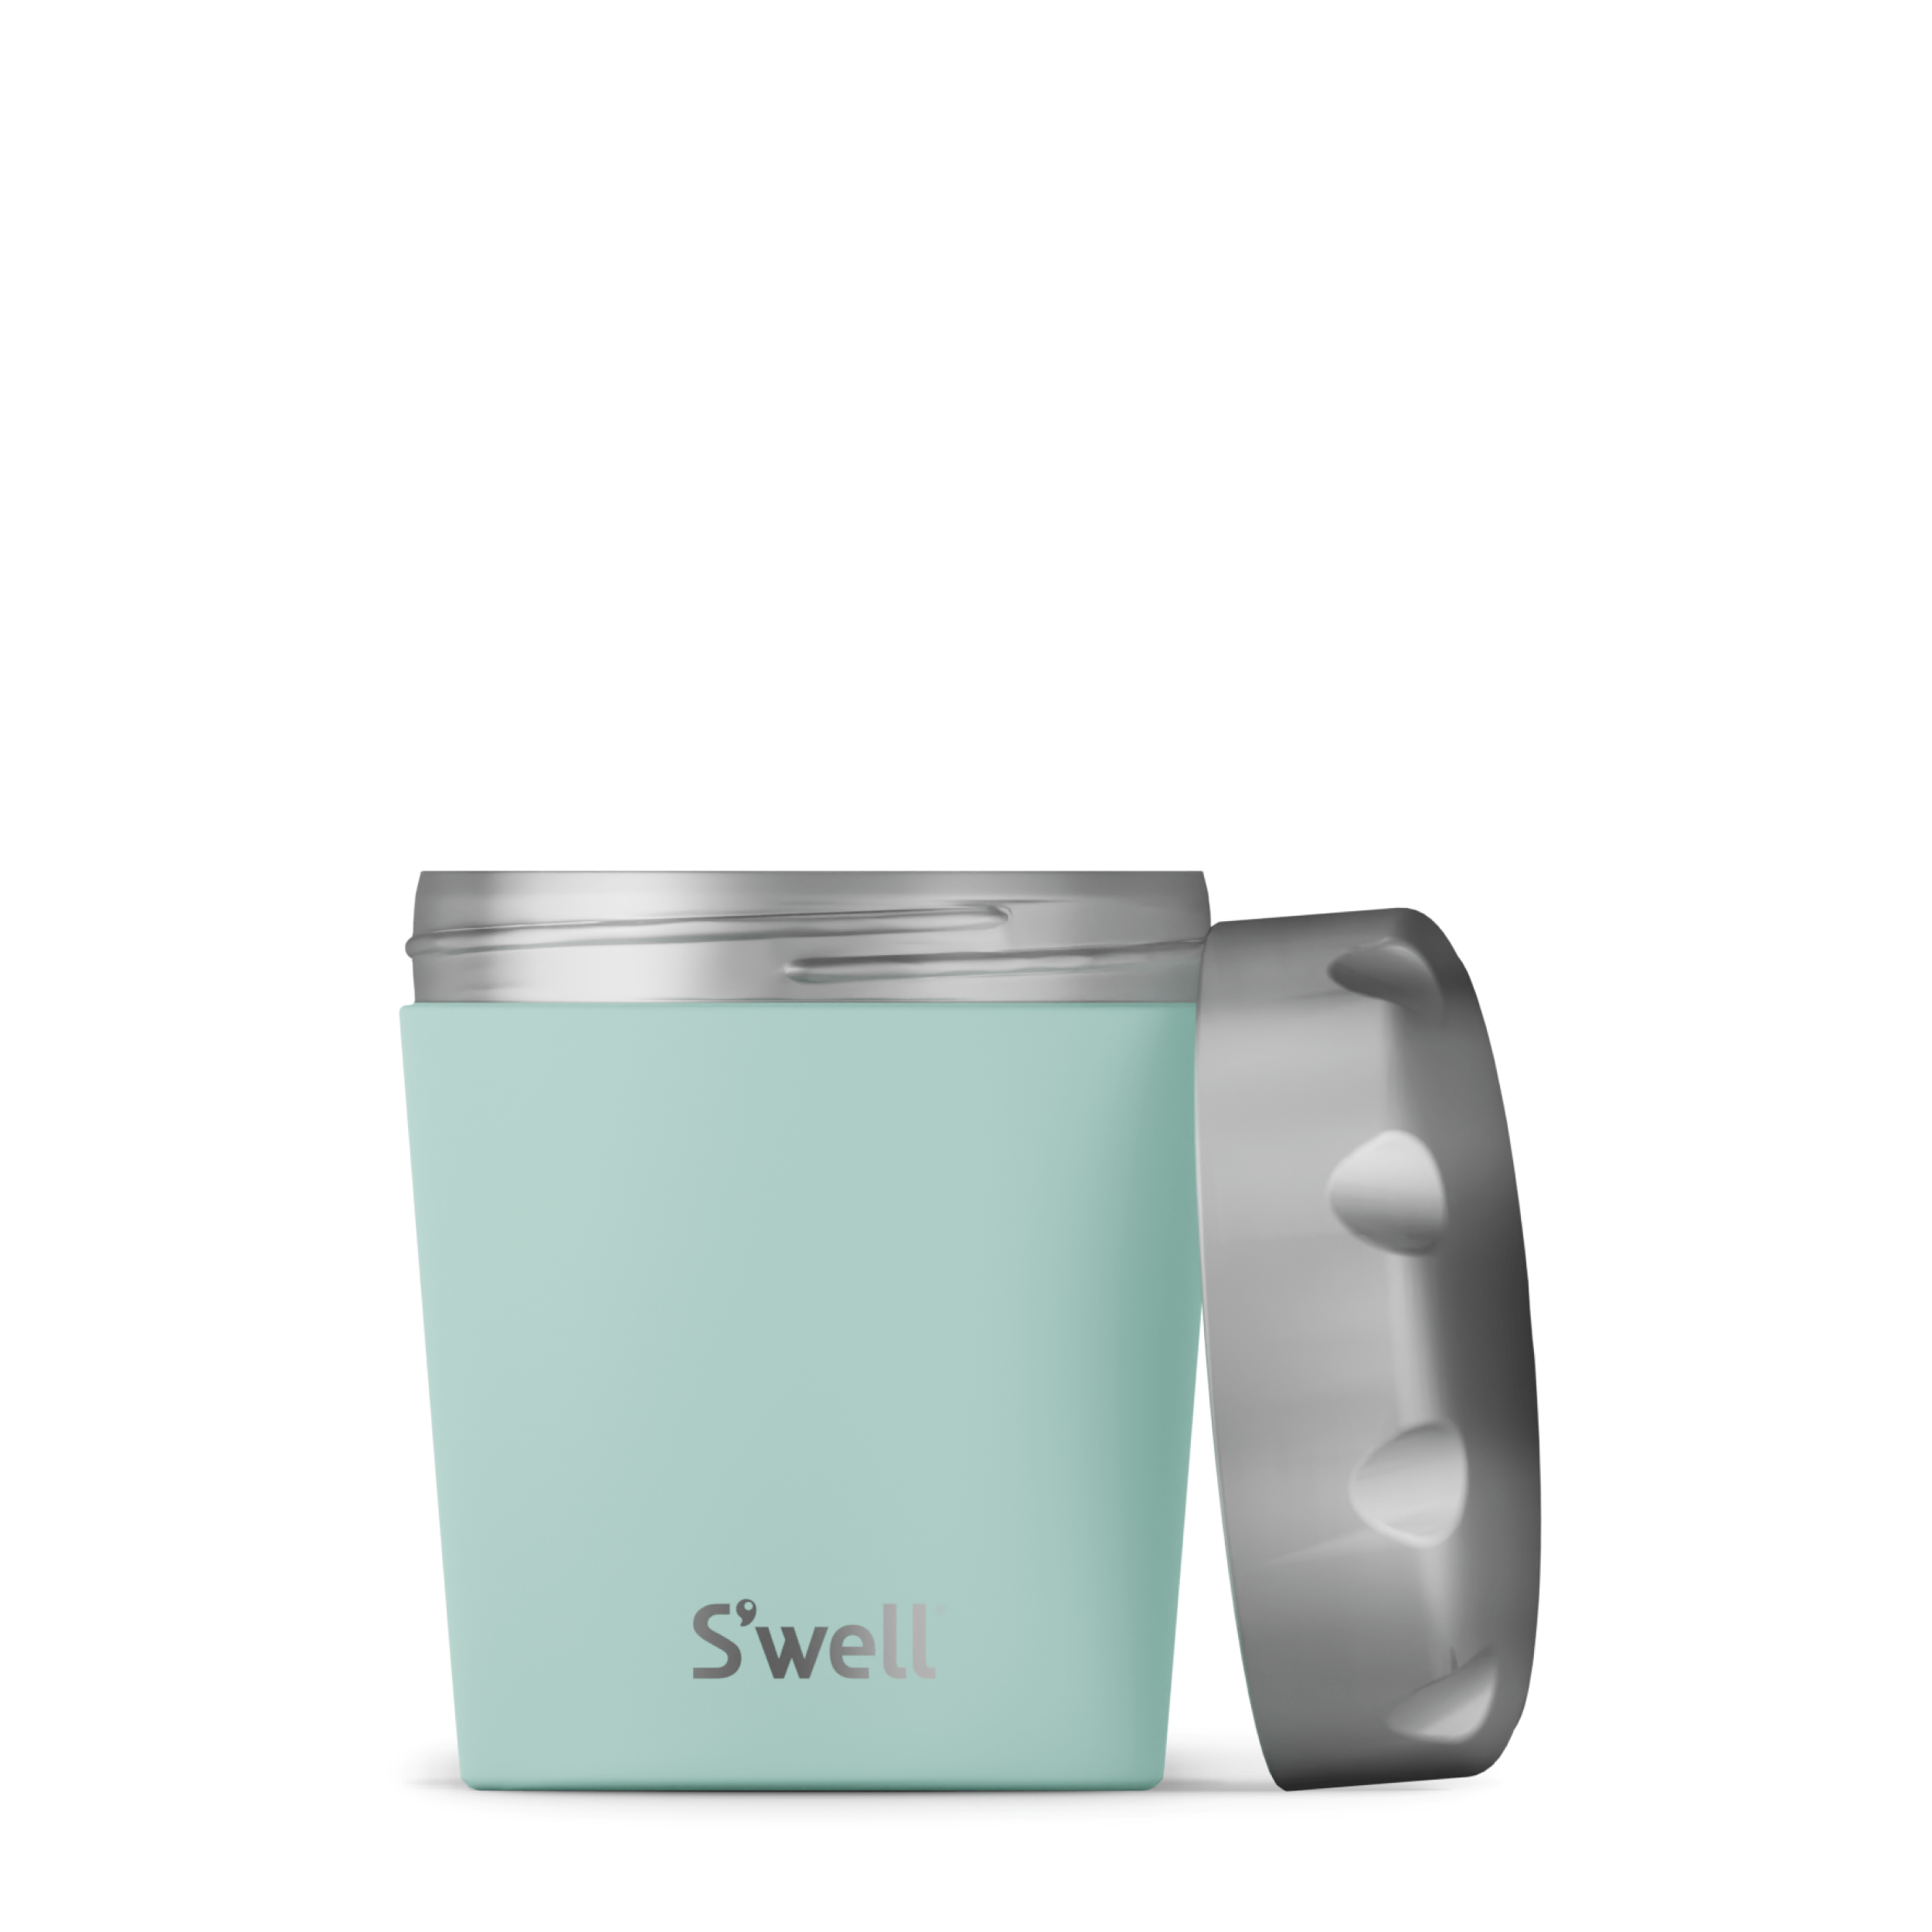 S'well Introduces New Ice Cream Coolers and Pint Bowls Ahead of Summer